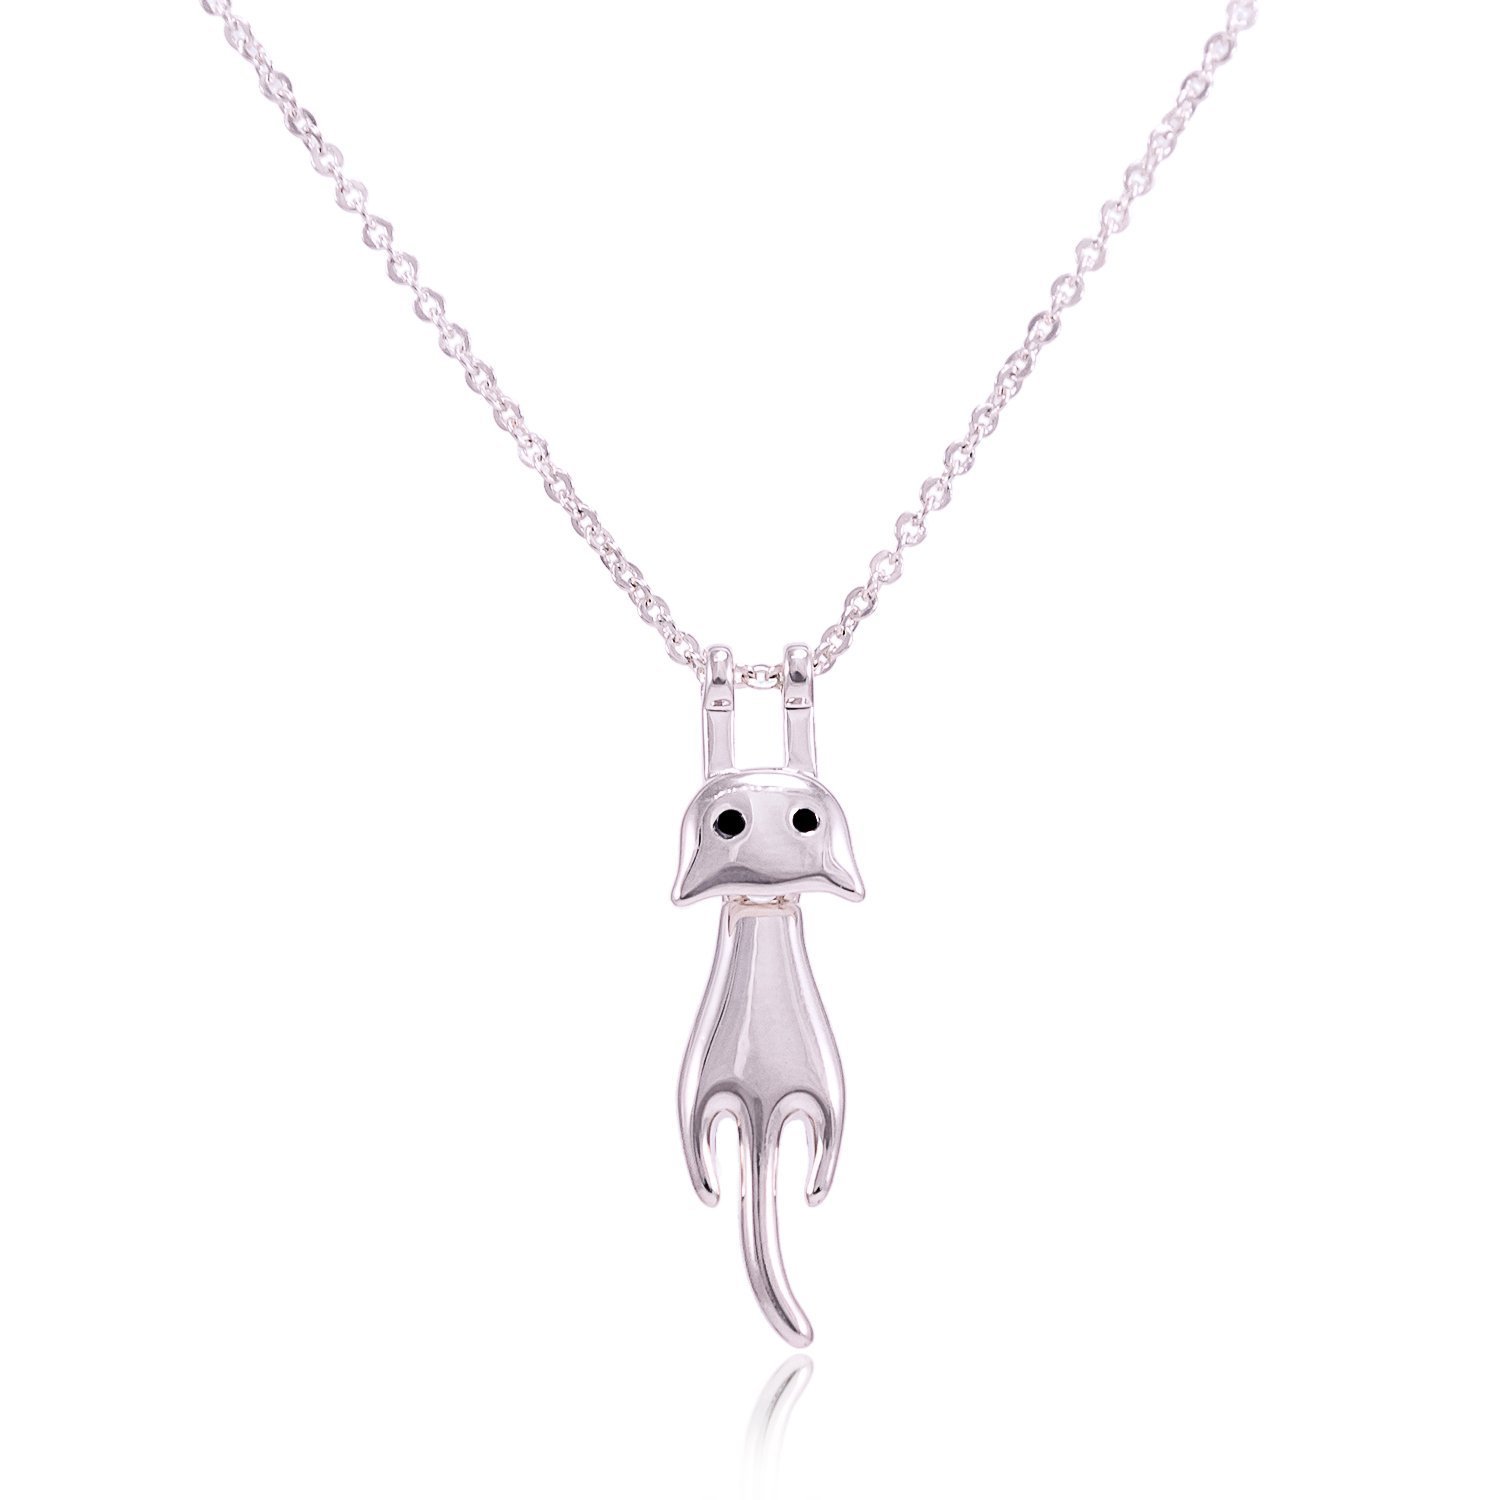 cat jewelry silver plated lucky cat girl pendant and necklace - the dog paws u0026 the cat hksbuje